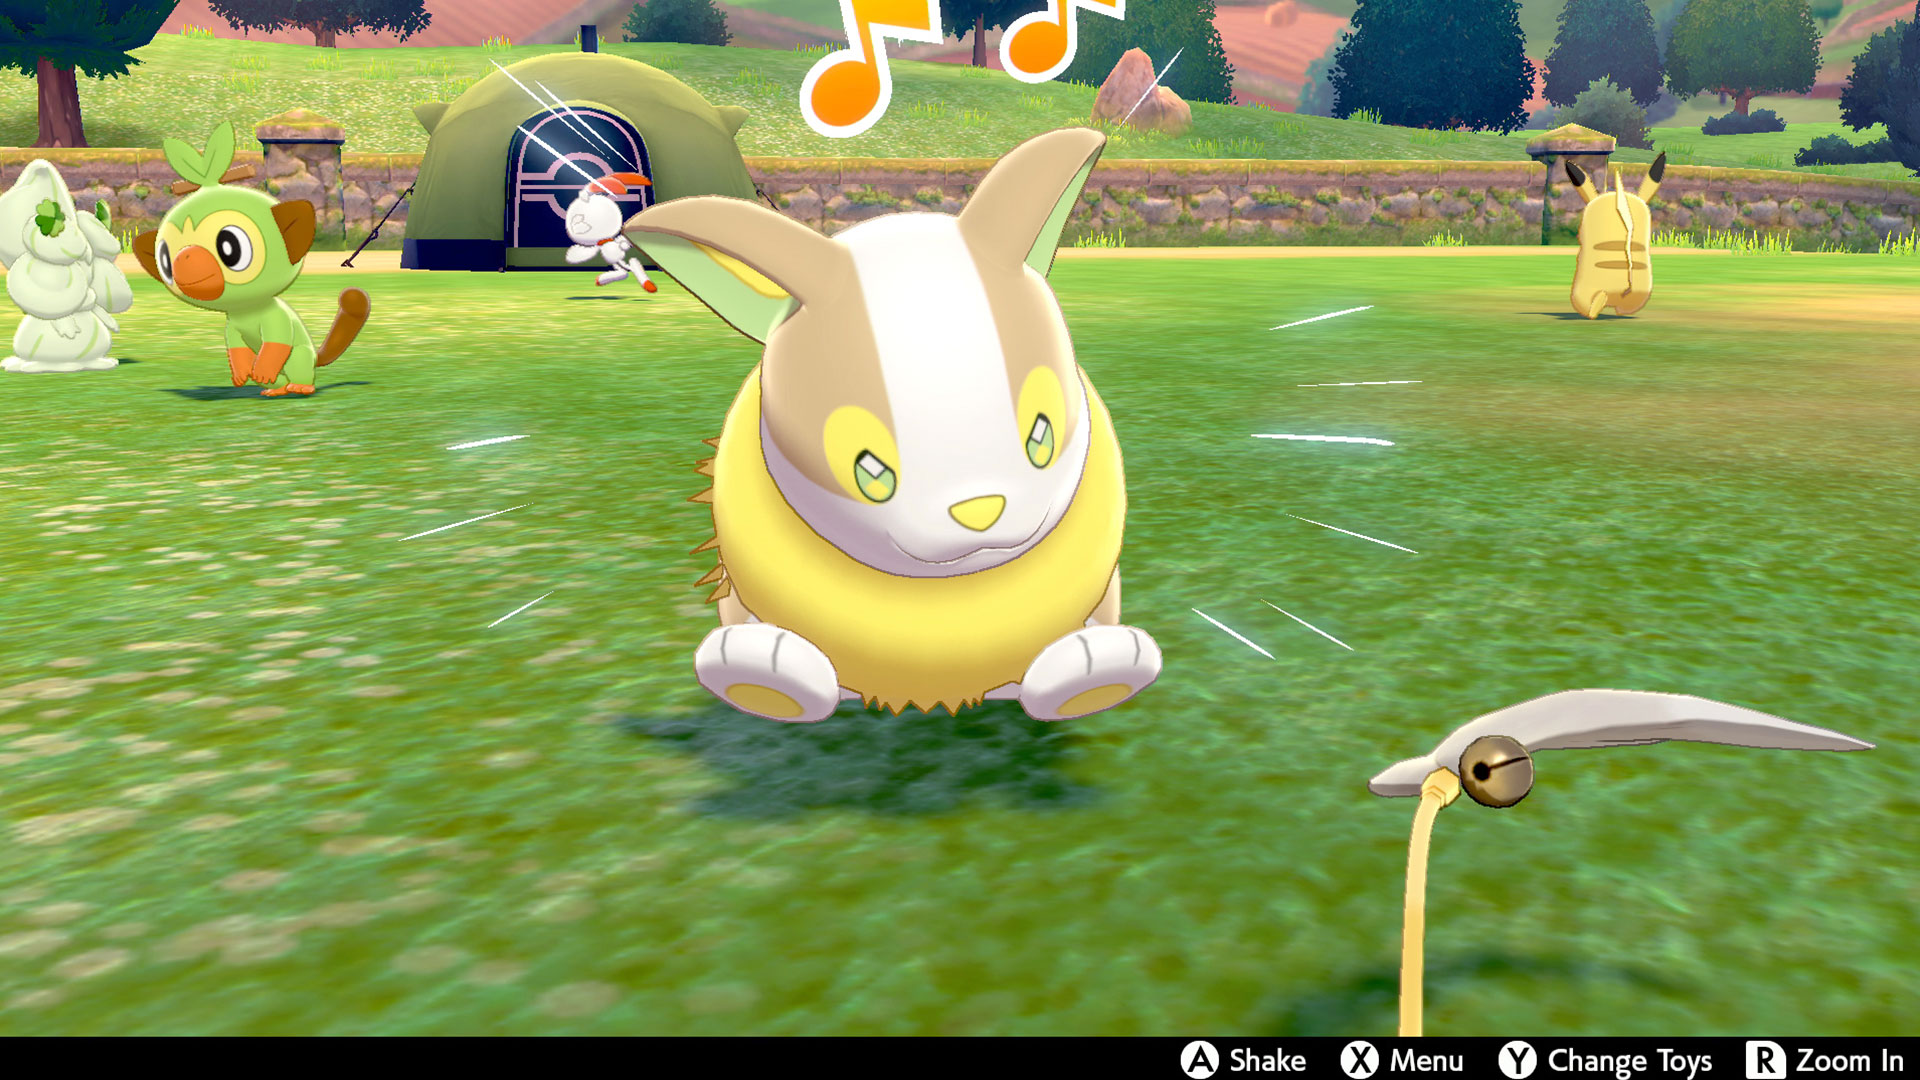 Pokemon Sword and Shield camping Tips and tricks for getting the most out of camping